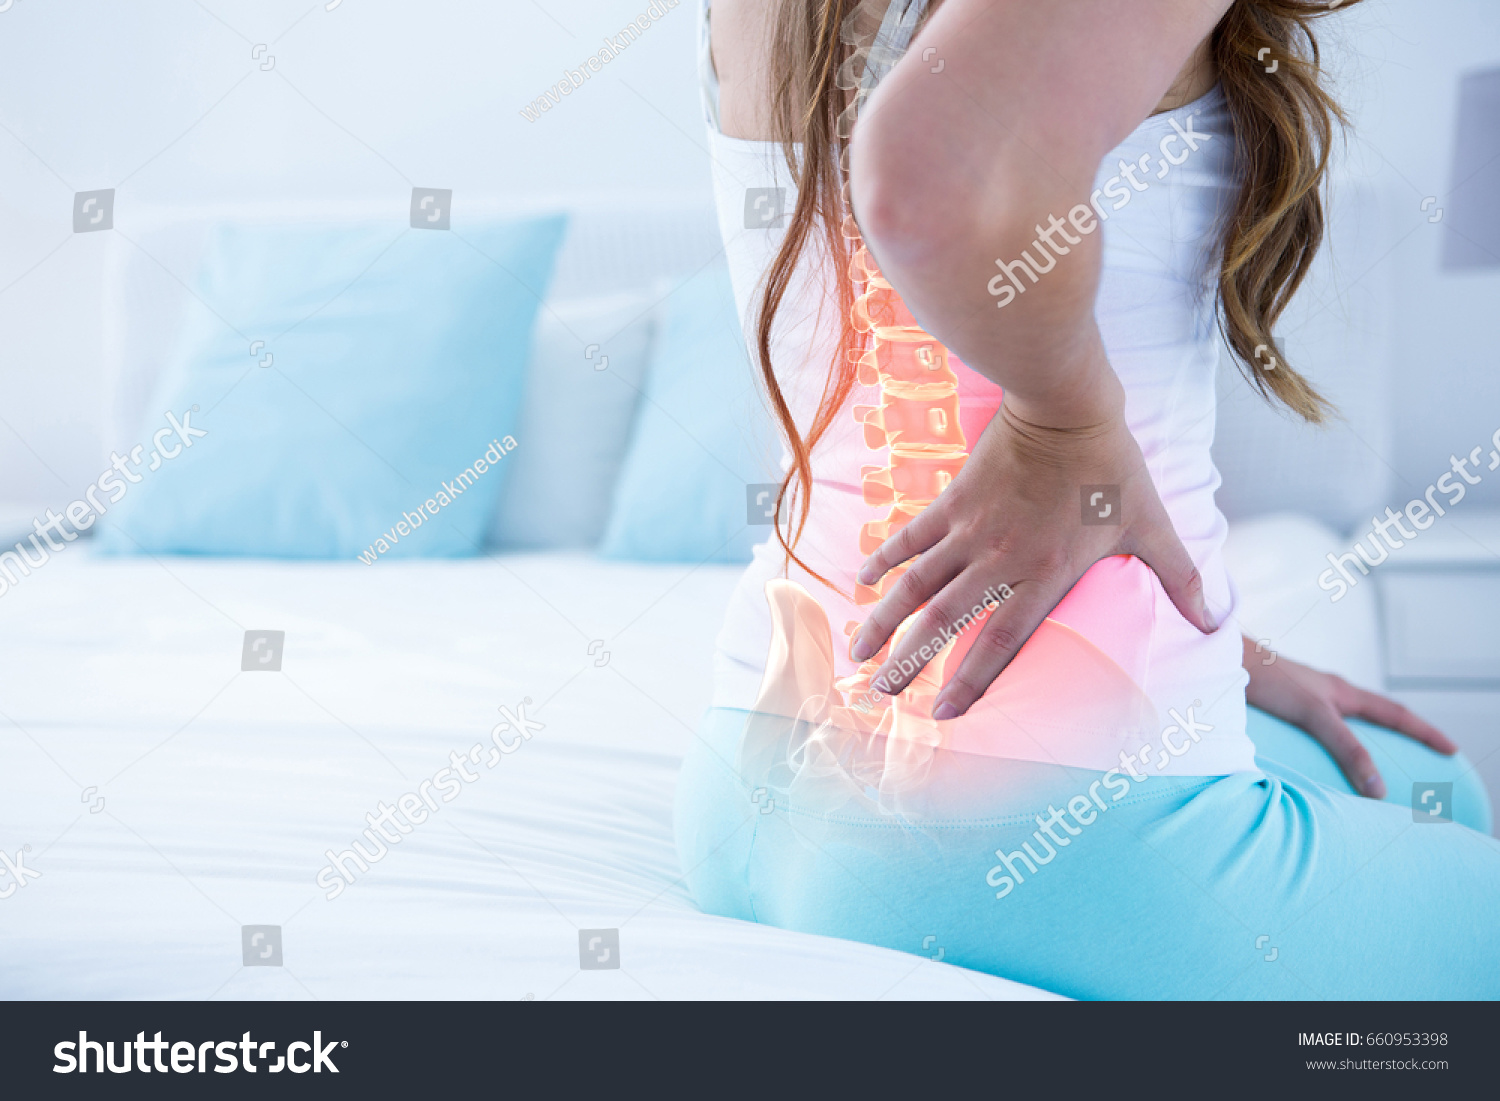 Digital composite of highlighted spine of woman with back pain at home #660953398